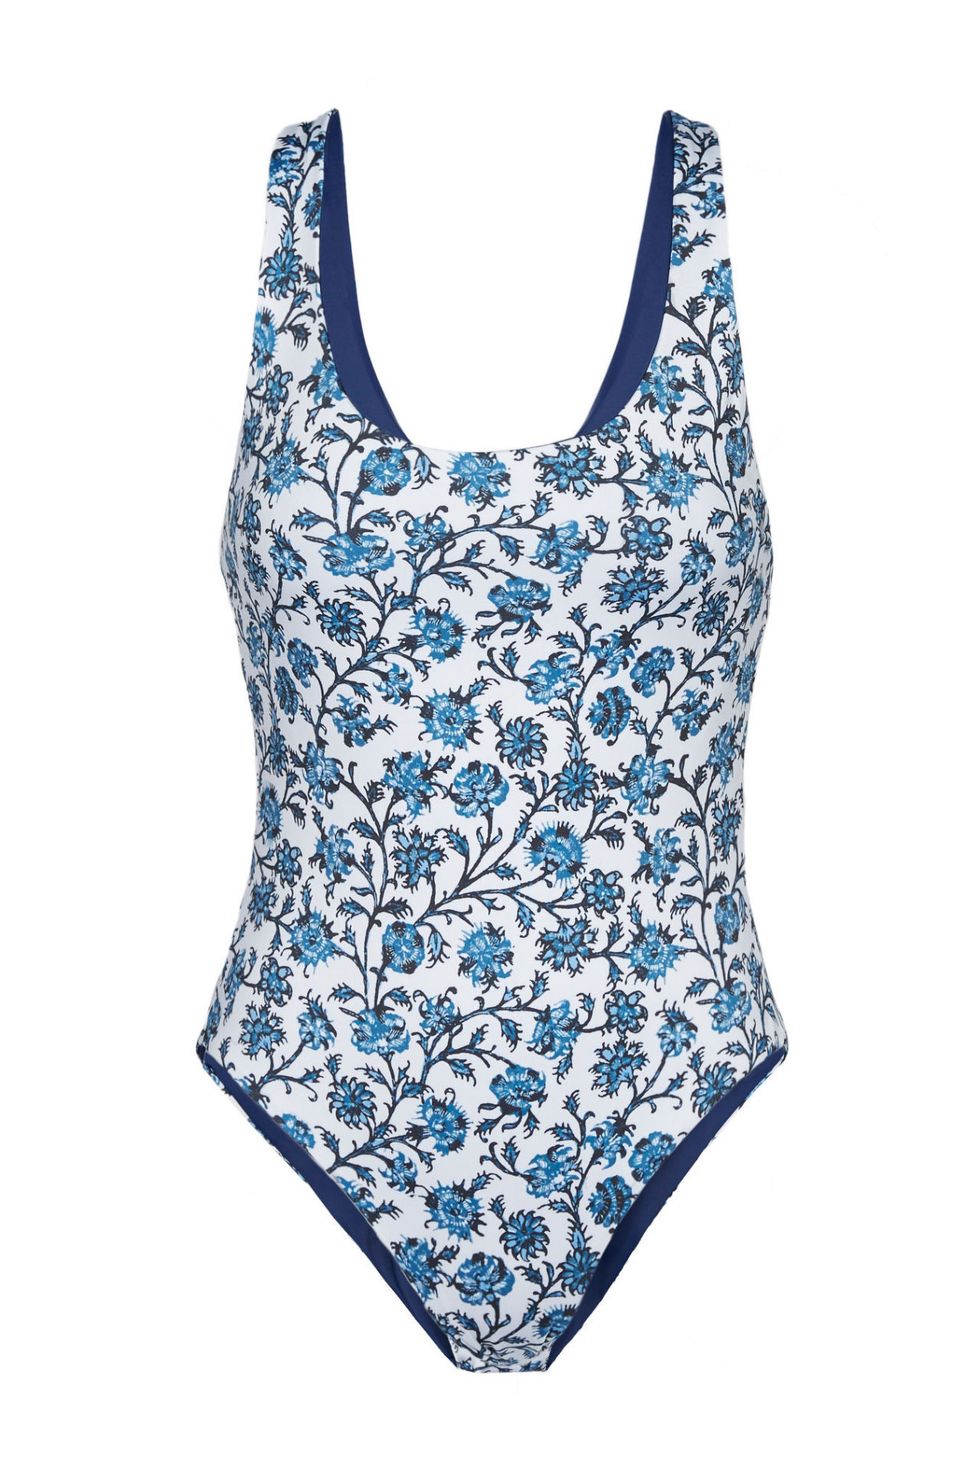 <p>Shop one of the summer's first style collaborations: This printed suit mixes a classic shape and print to beautiful effect.</p><p><em data-redactor-tag="em" data-verified="redactor">Joie x Solid &amp; Striped Anne-Marie Swimsuit, $176; </em><a href="http://www.joie.com/the-anne-marie-reversible-onepiece-porcelain" target="_blank" data-tracking-id="recirc-text-link"><em data-redactor-tag="em" data-verified="redactor">joie.com</em></a></p>